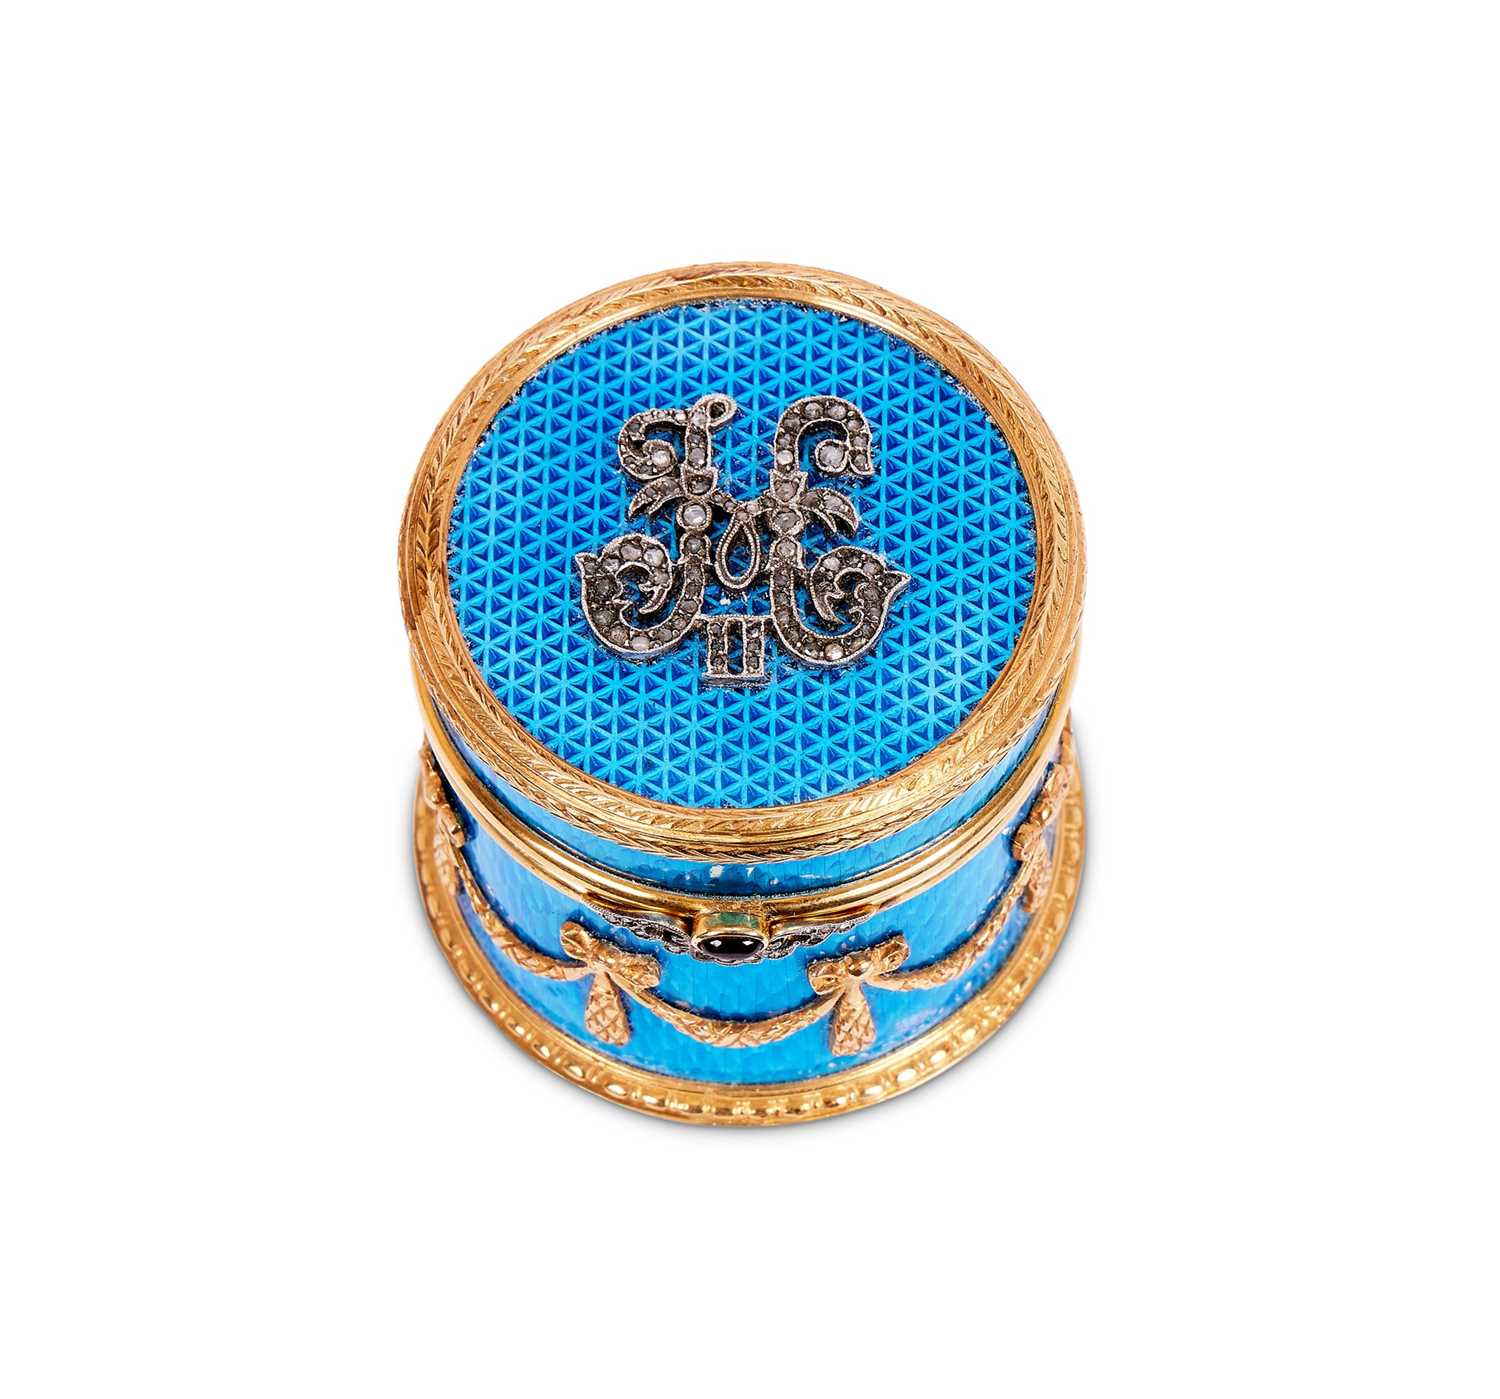 A FABERGE STYLE SILVER GILT, DIAMOND AND ENAMEL MOUNTED PILL BOX - Image 2 of 4